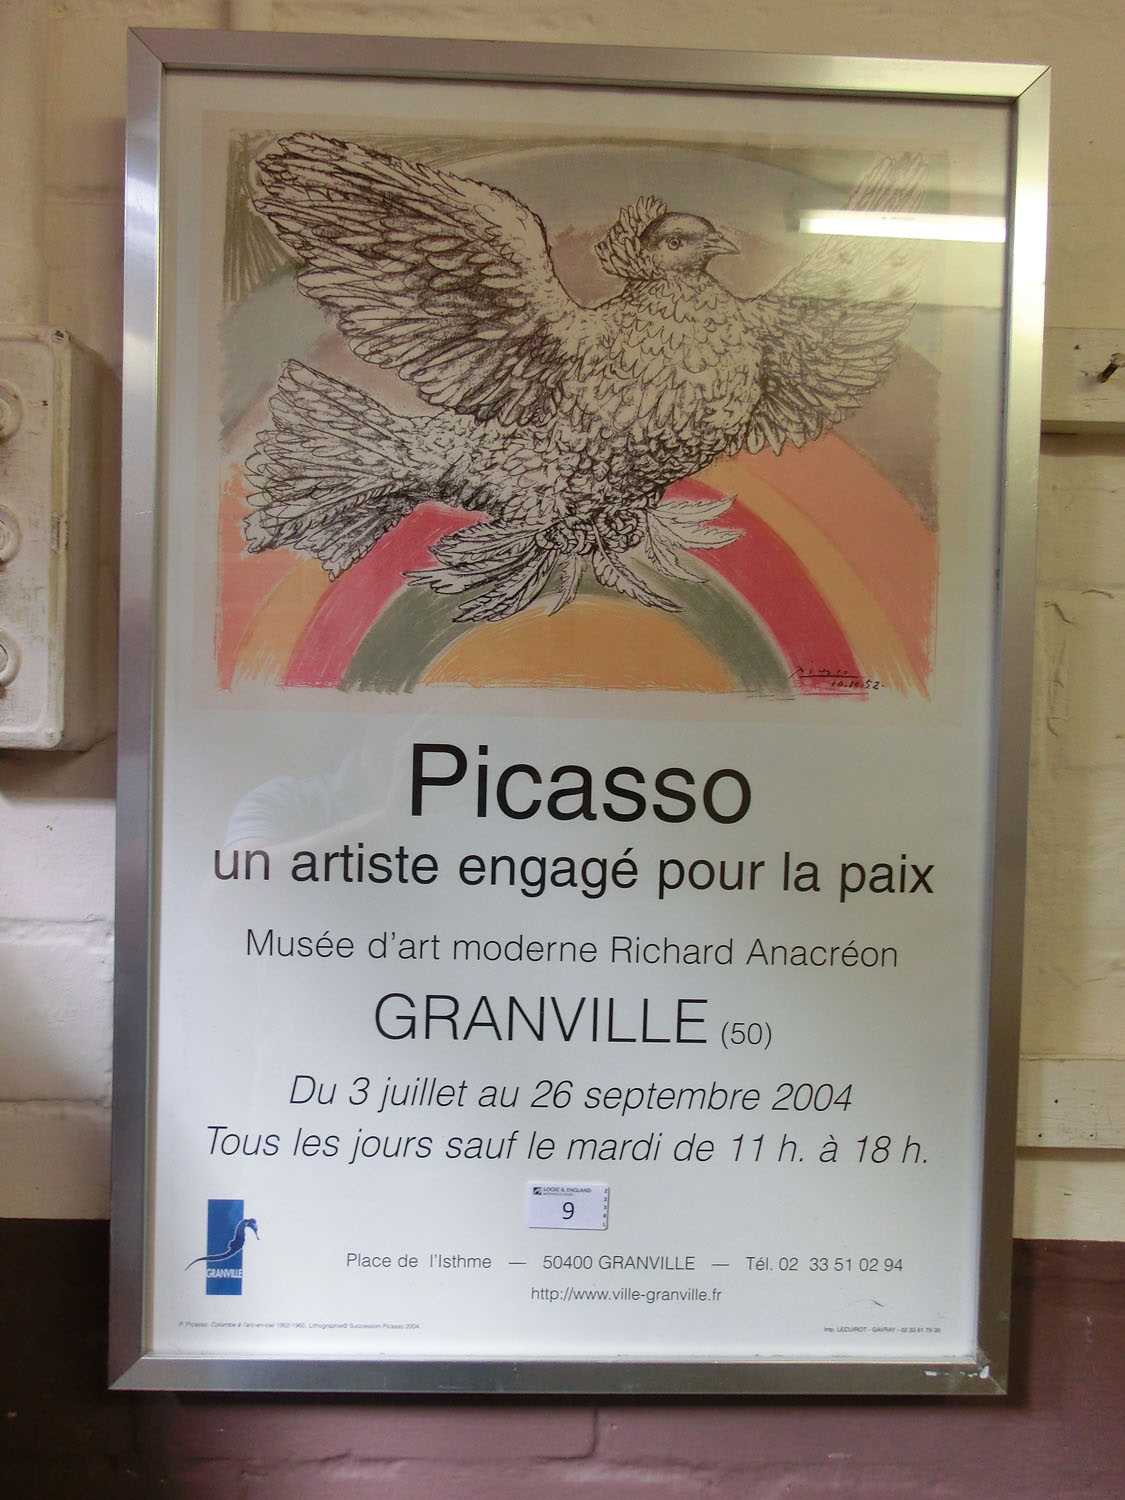 A reproduction Picasso advertising poster